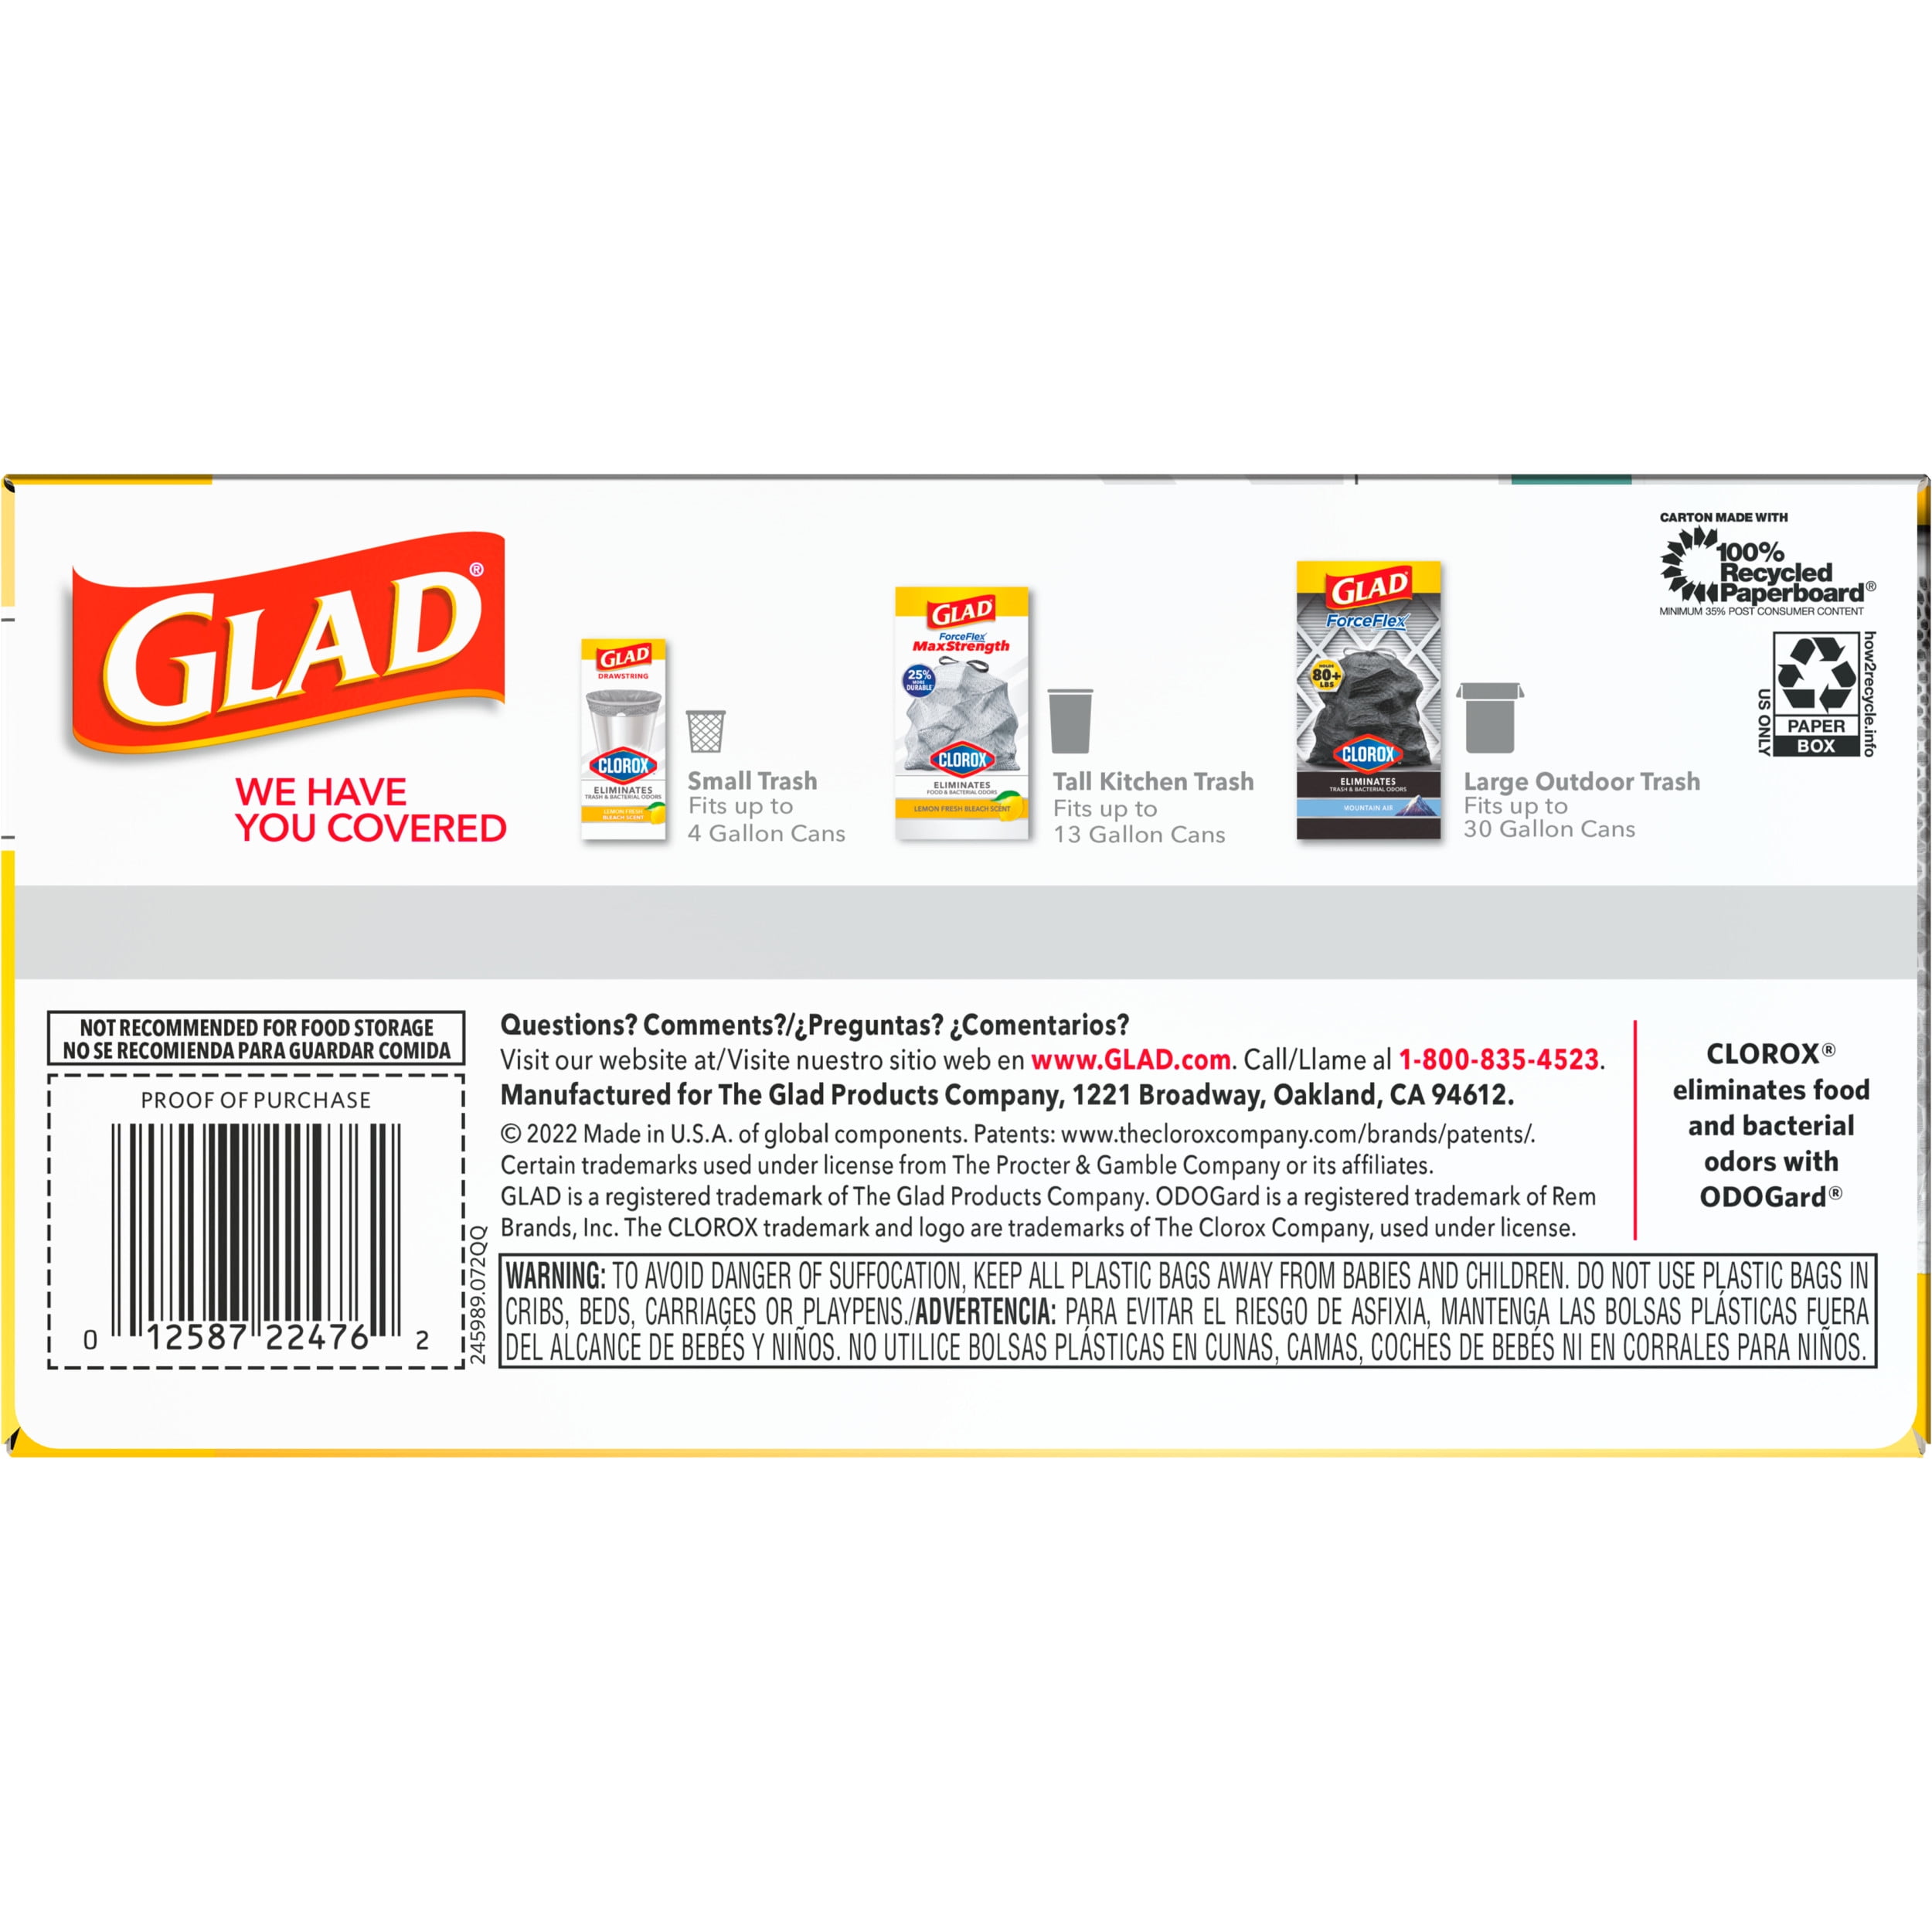 Glad ForceFlex MaxStrength with Clorox Tall Kitchen Drawstring Trash Bags,  13 Gallon Grey Trash Bags, Eucalyptus and Peppermint Scent, 90 Count